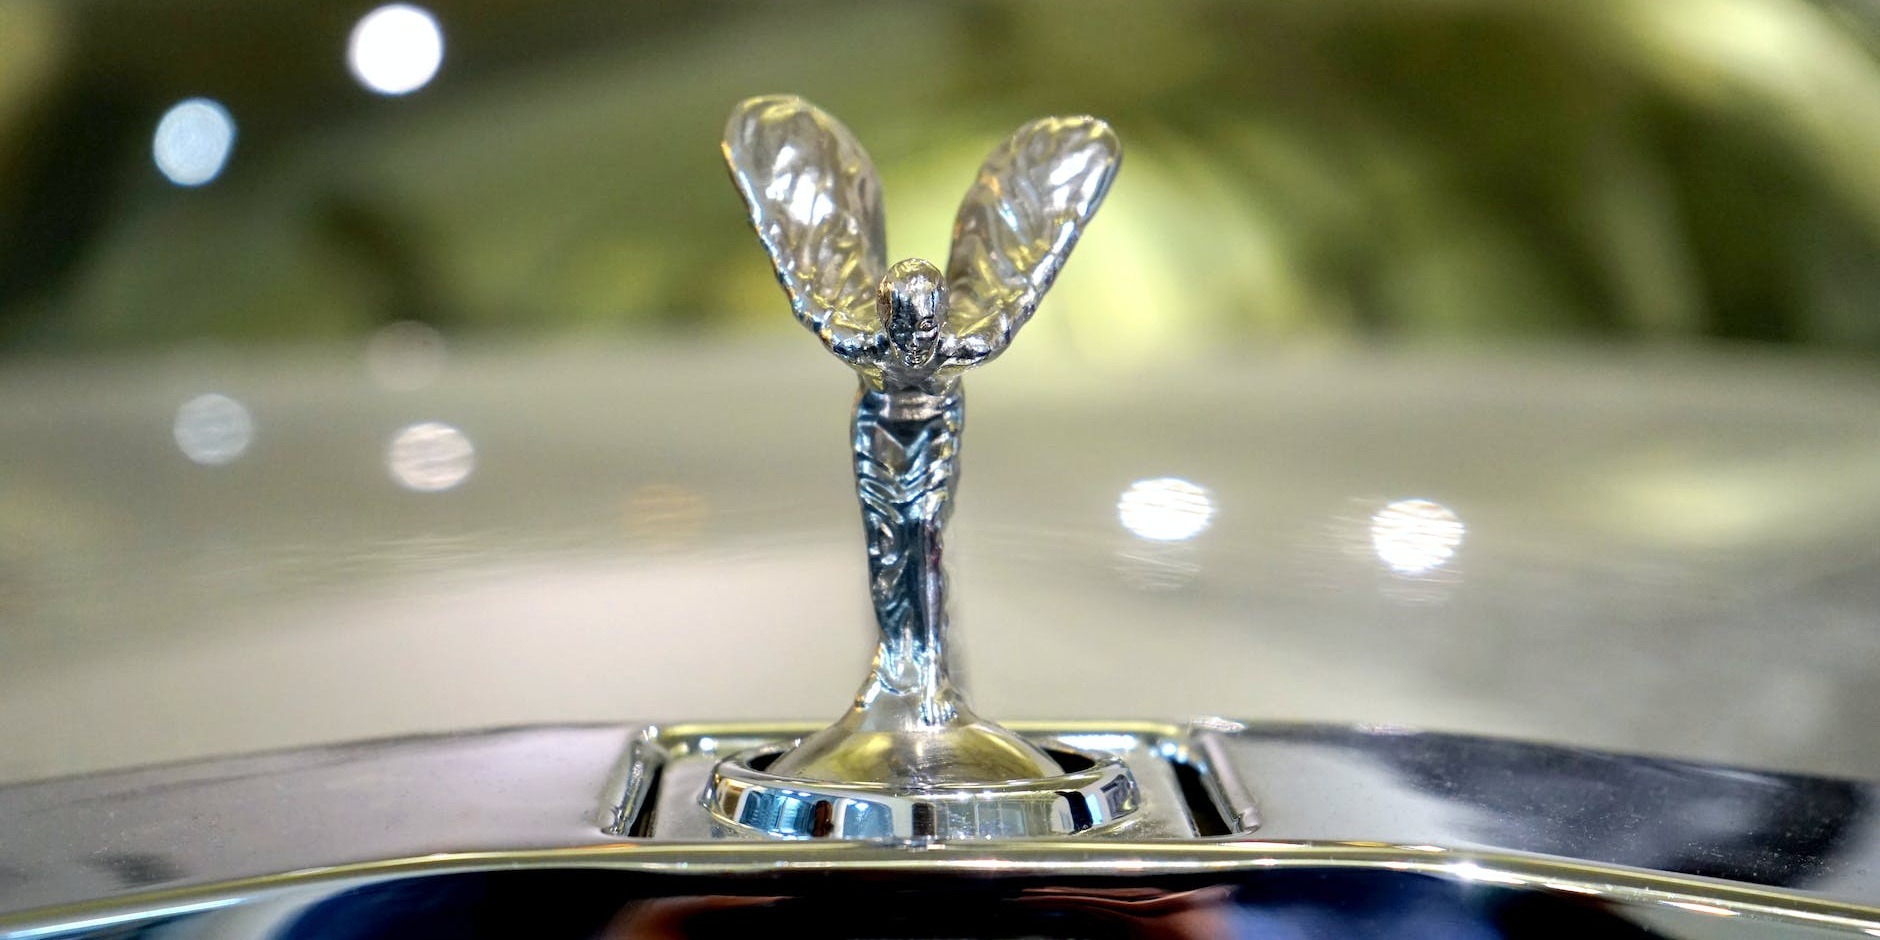 Experience Luxury on Wheels: Why a Rolls Royce Phantom is the Premier Choice for Special Occasions